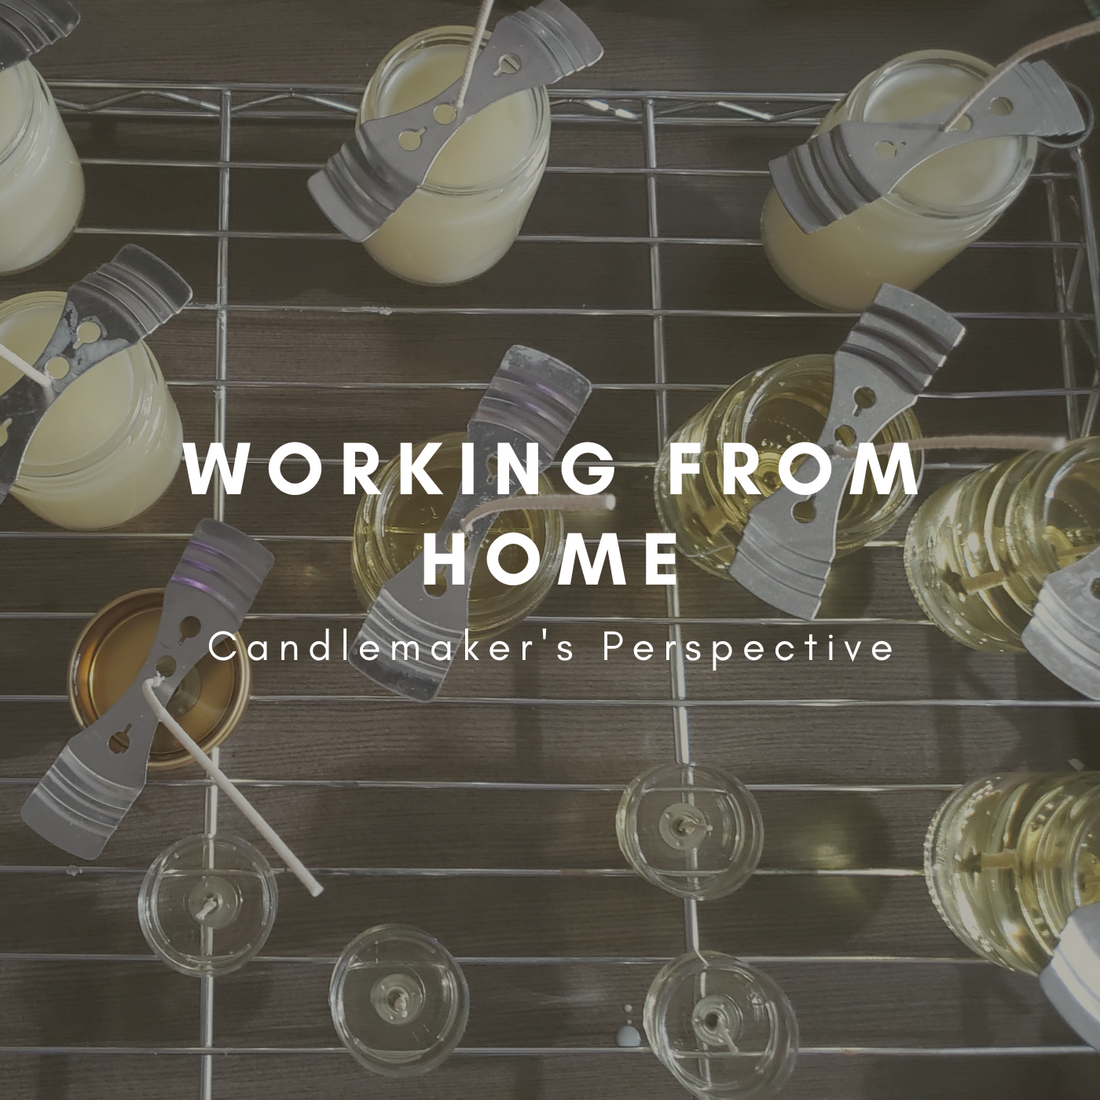 Working From Home: Candlemaker's Perspective